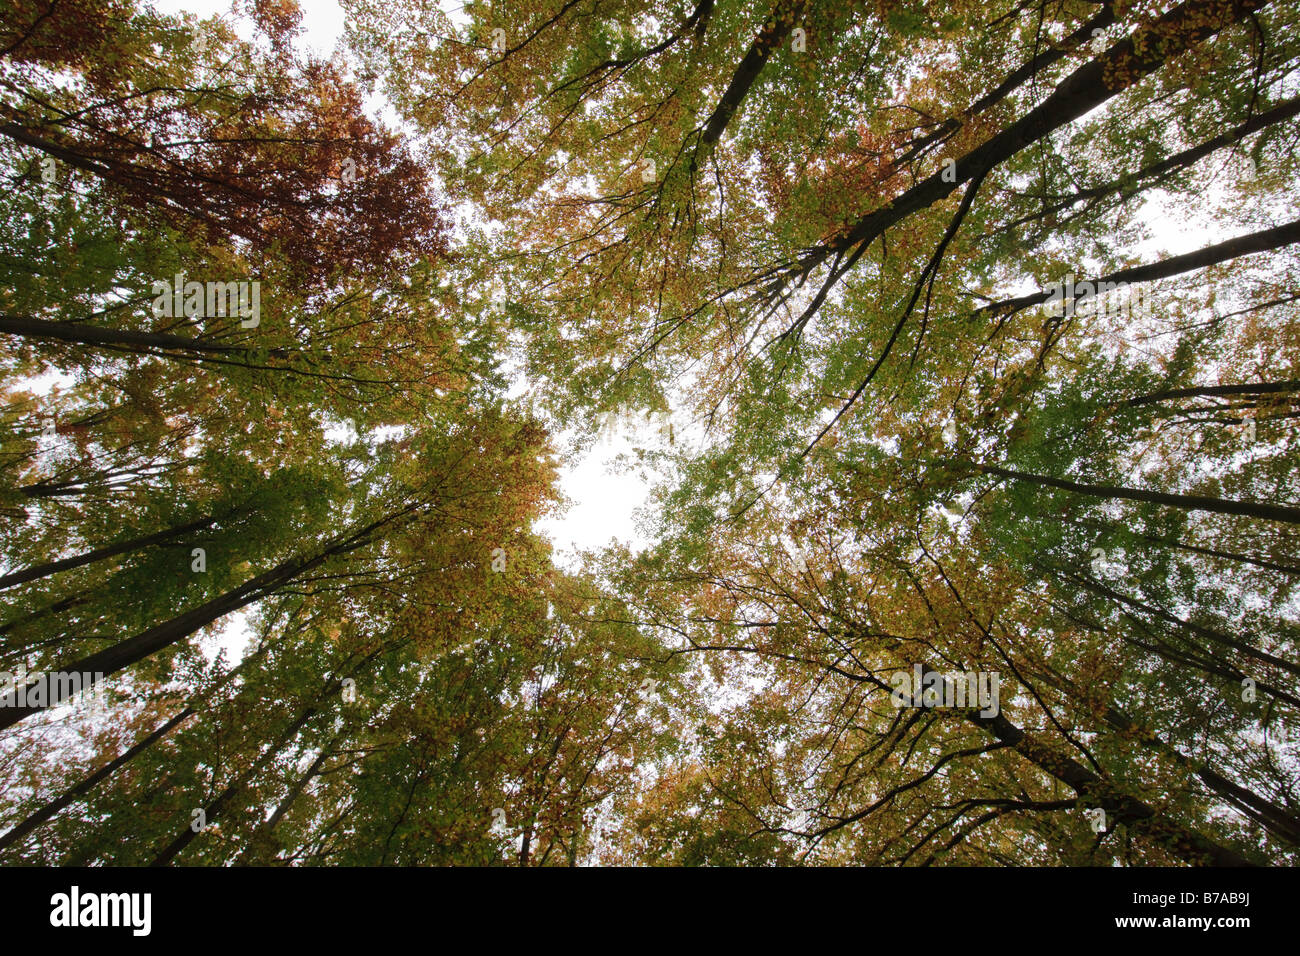 Autumnal canopy of leaves in the Vienna Woods with wide-angle lens, Lower Austria, Austria, Europe Stock Photo